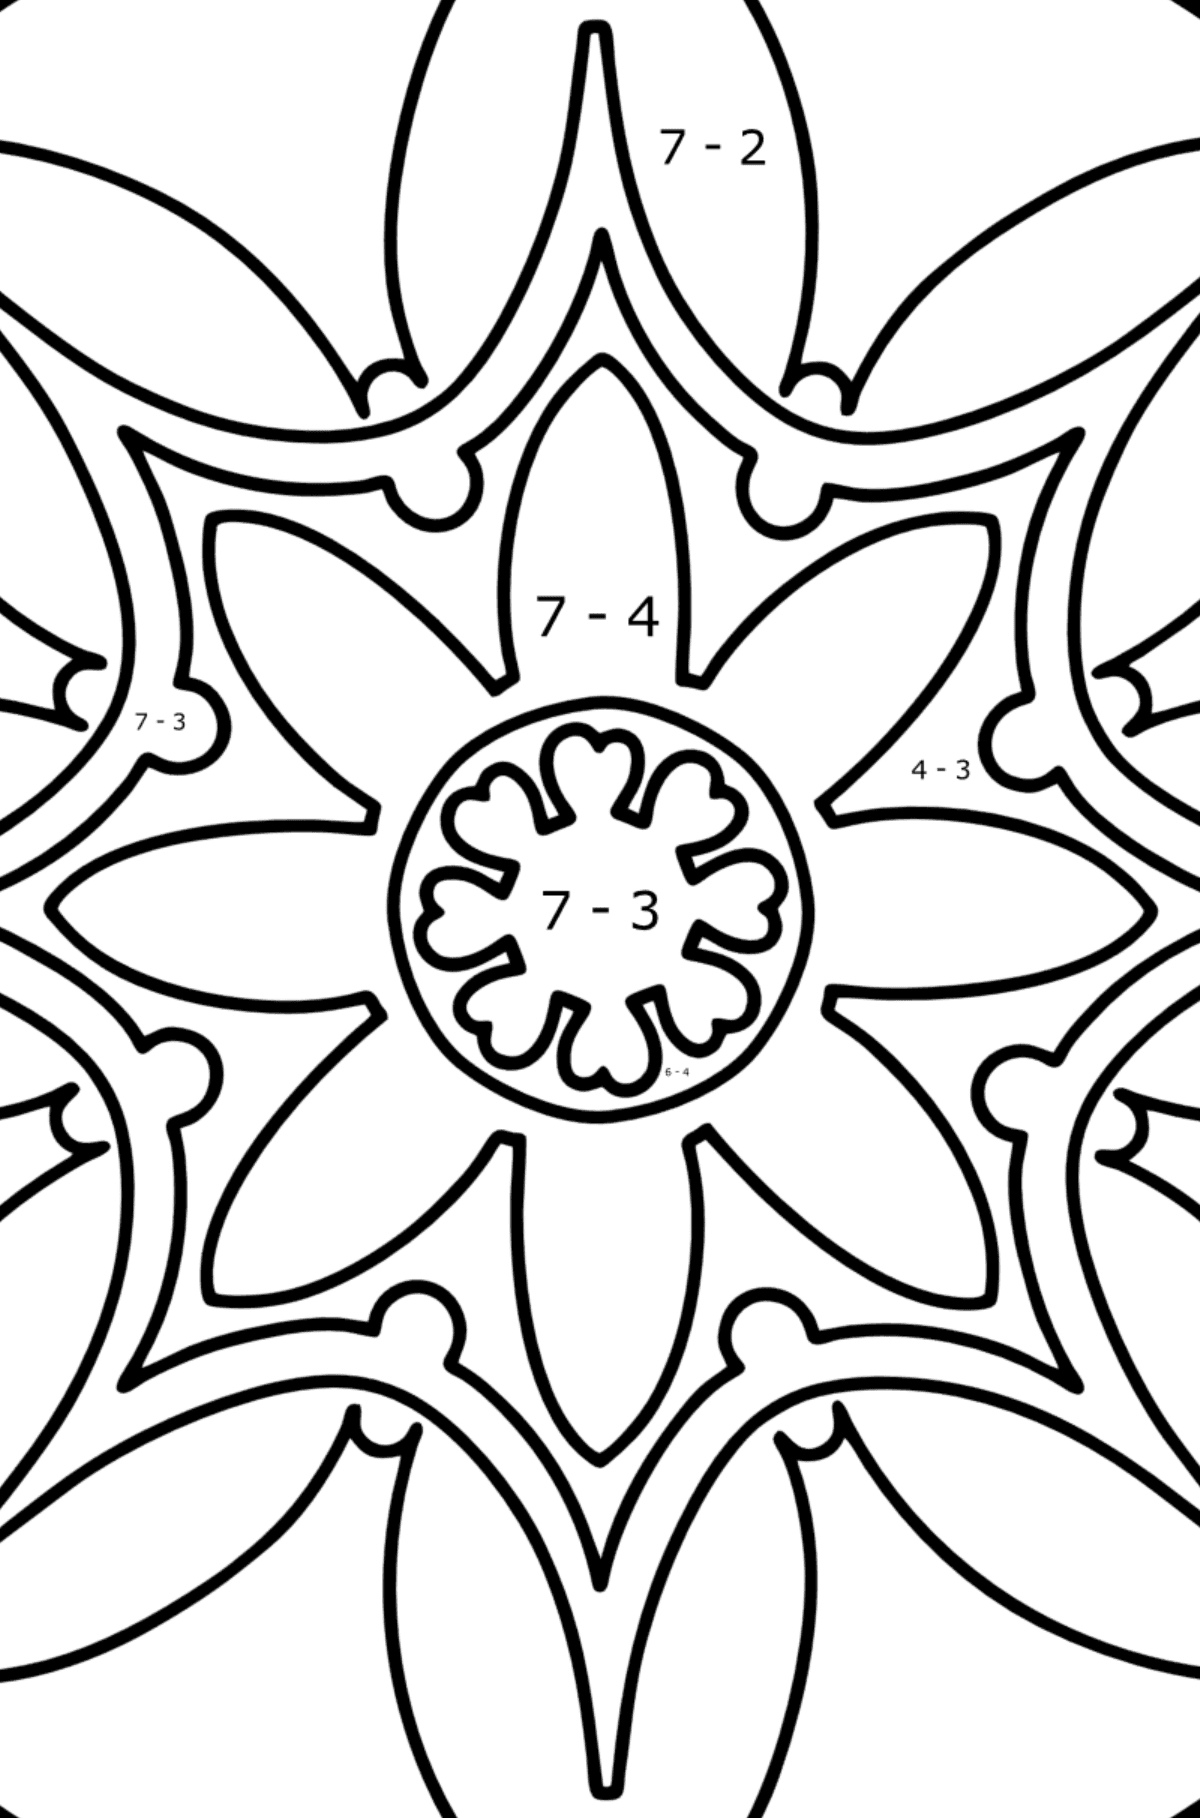 Mandala coloring page - 7 elements - Math Coloring - Subtraction for Kids